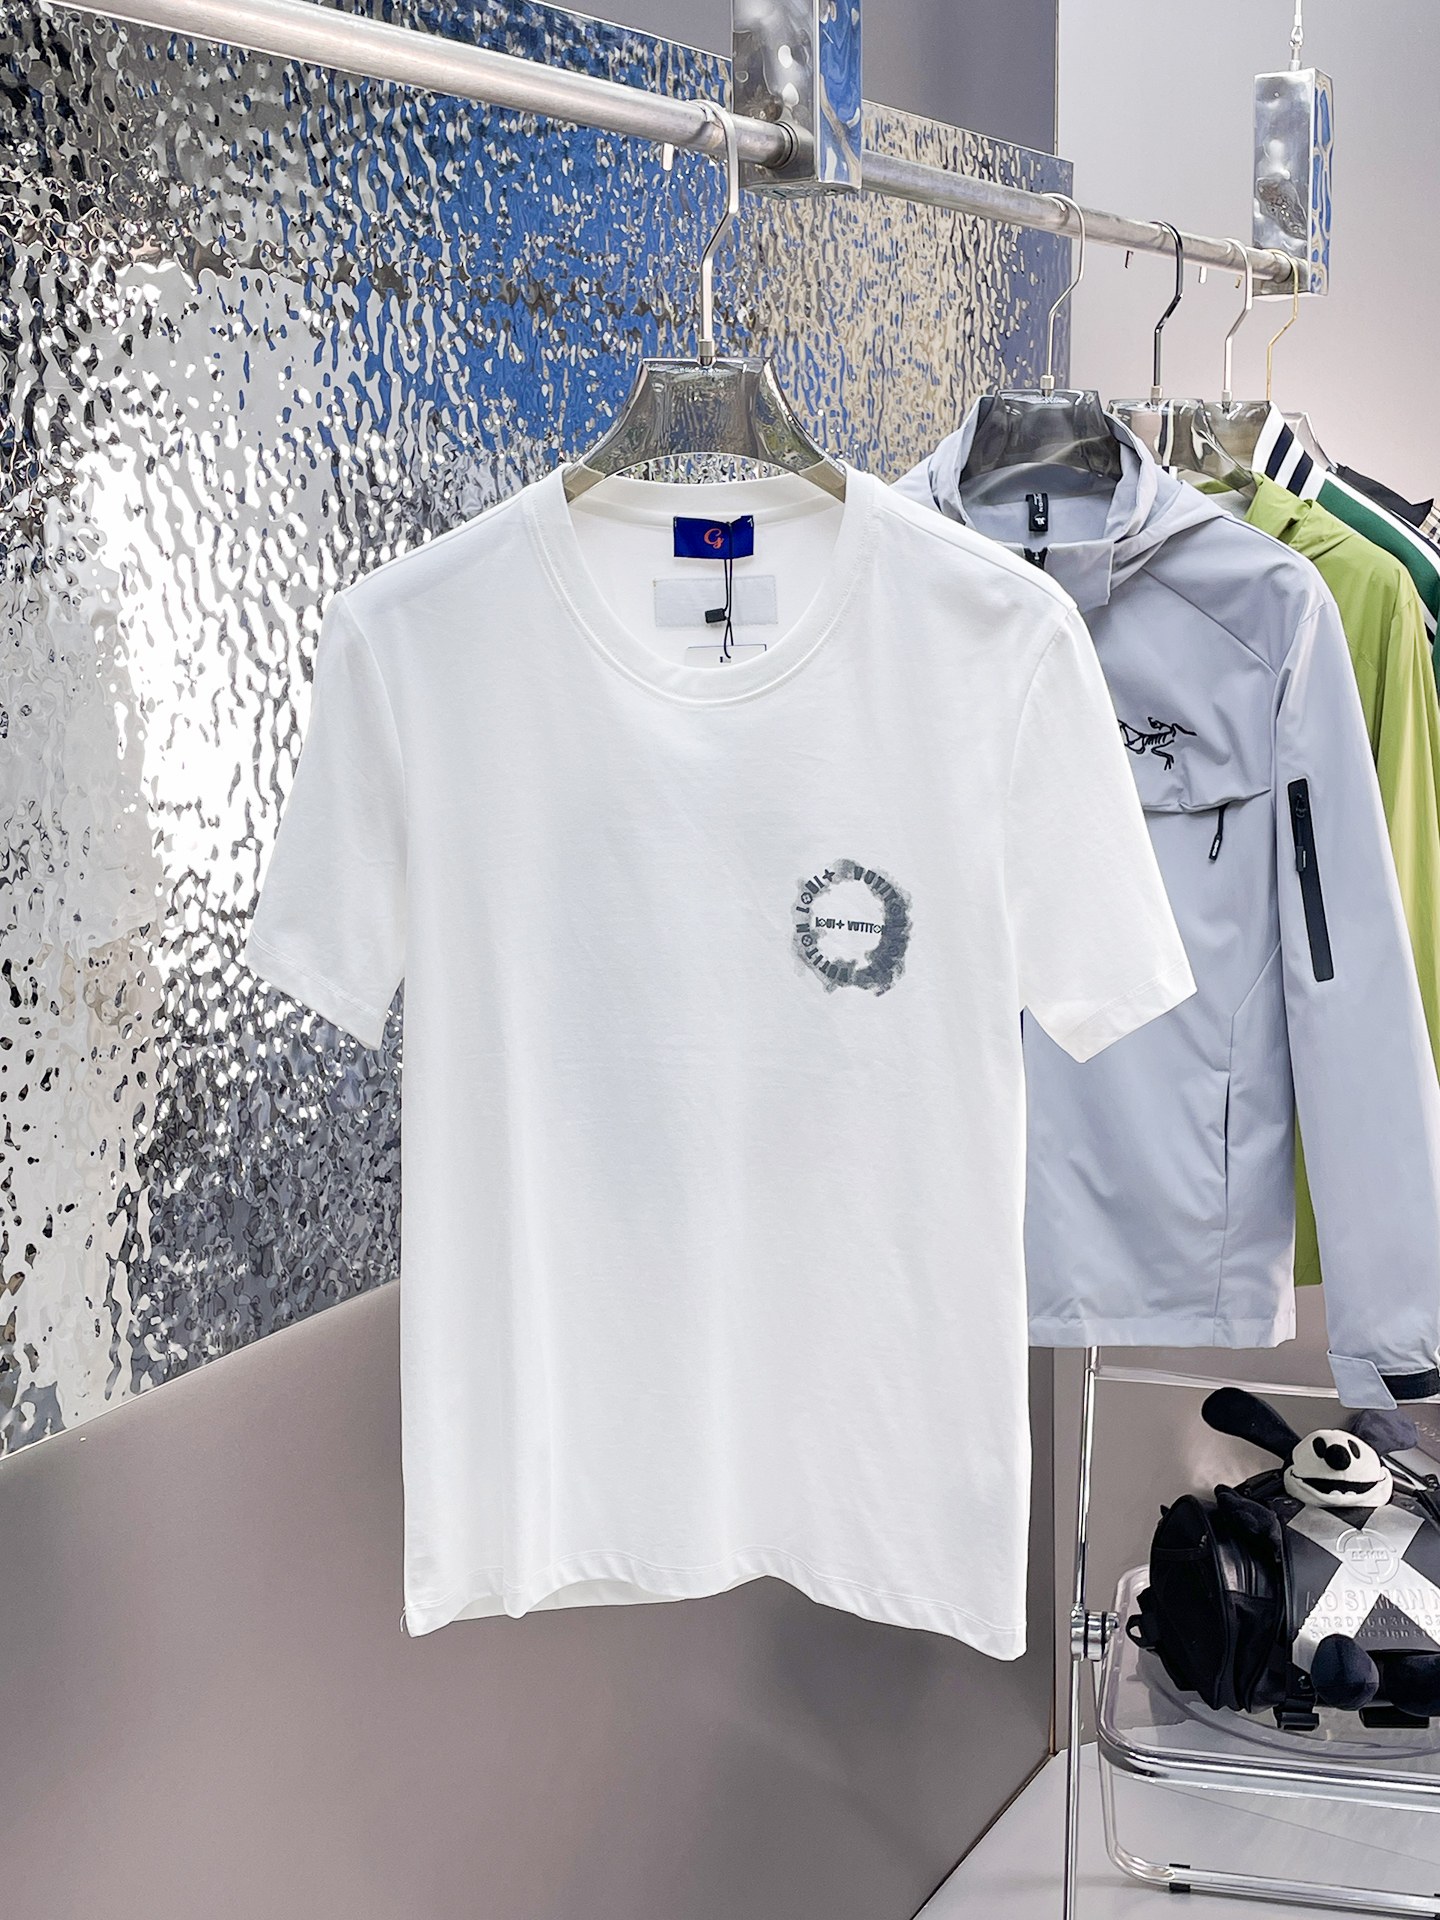 Louis Vuitton Clothing T-Shirt Summer Collection Fashion Short Sleeve